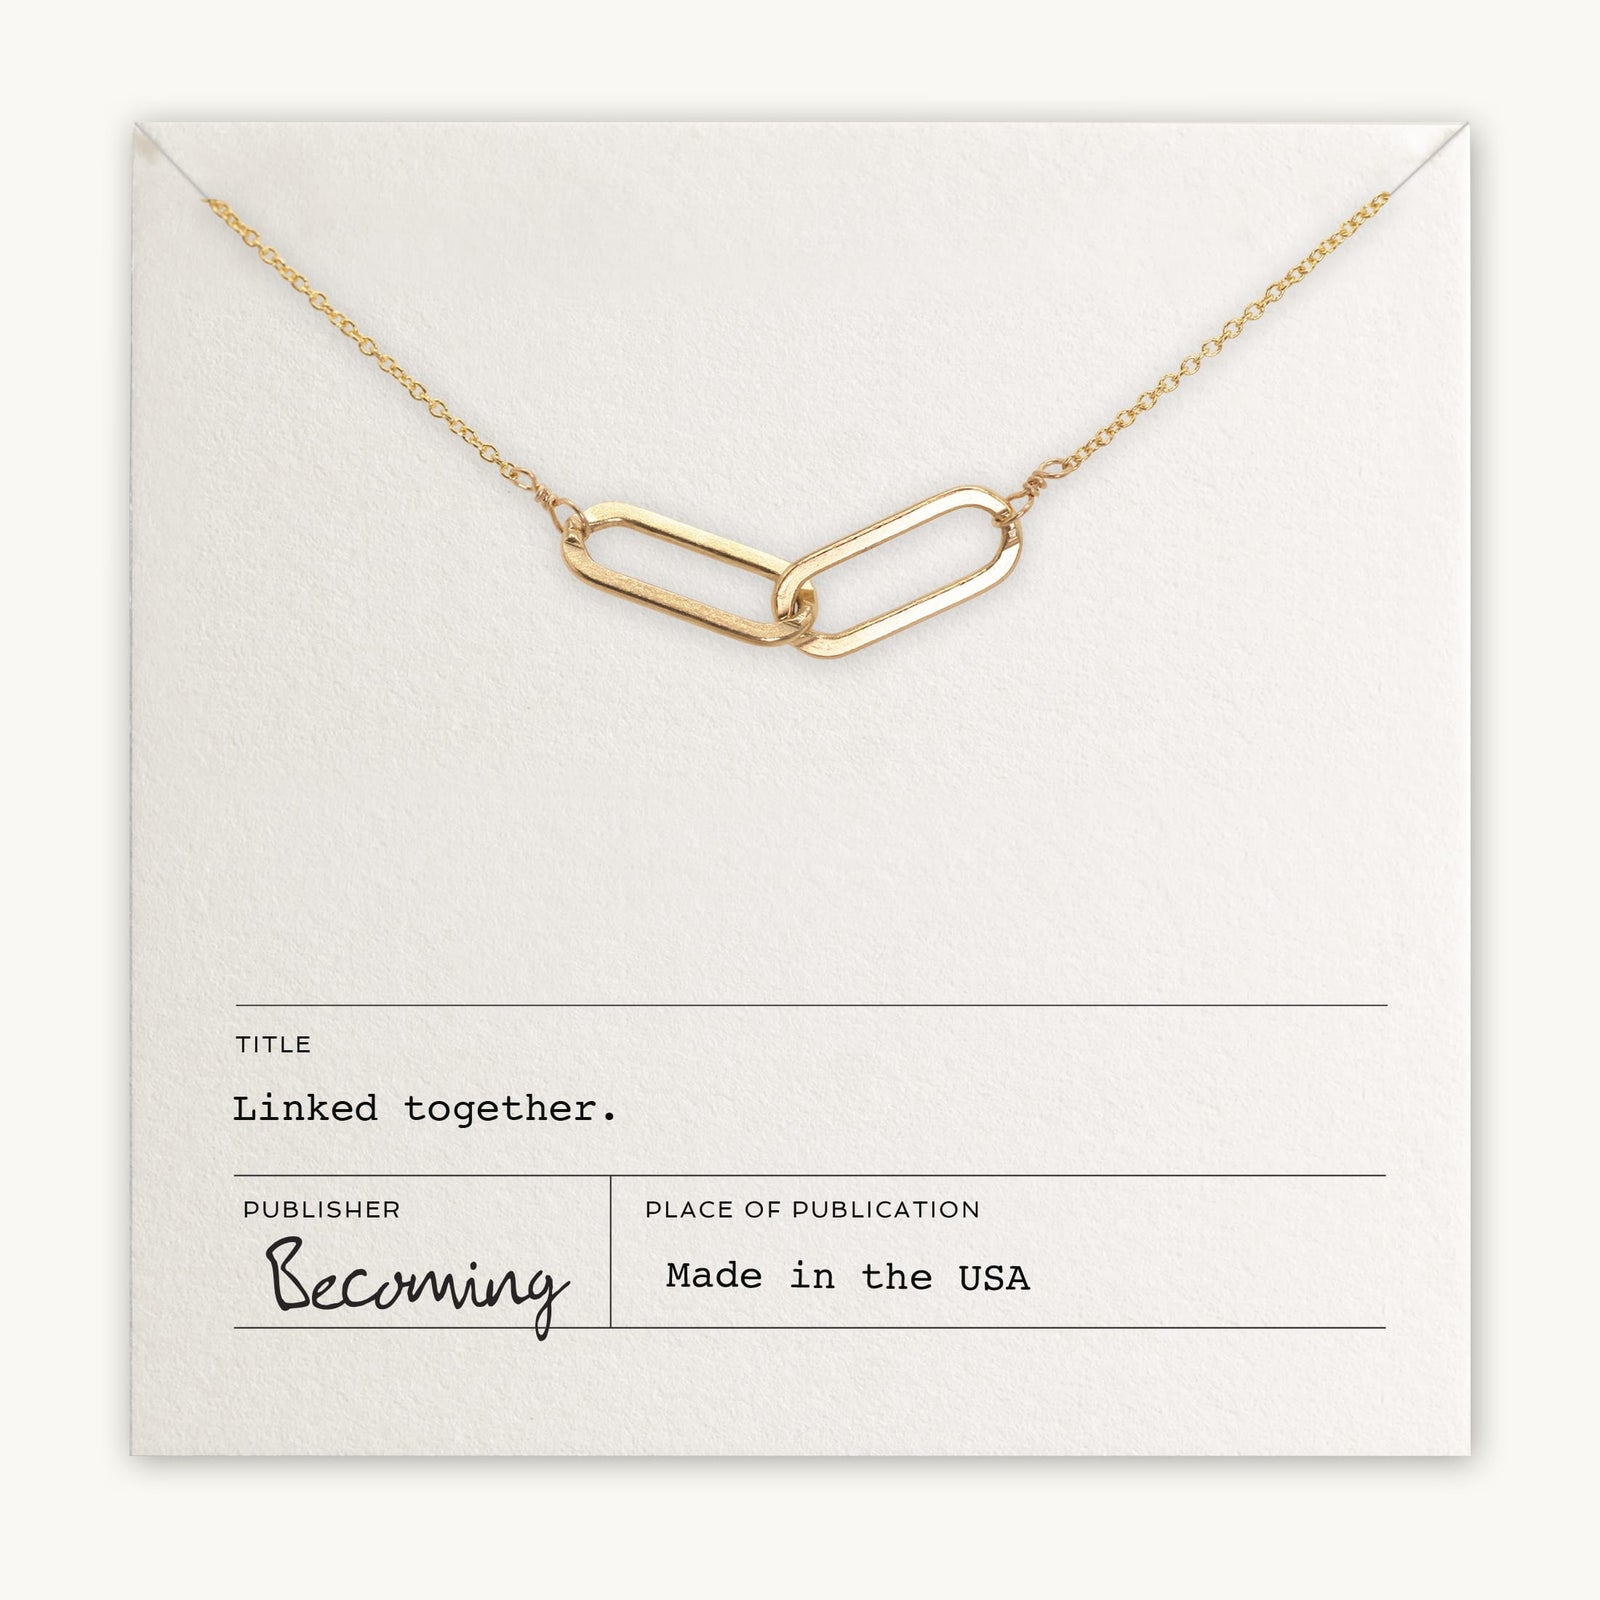 Becoming Jewelry's Linked Together Necklace displayed on a white background with the words 